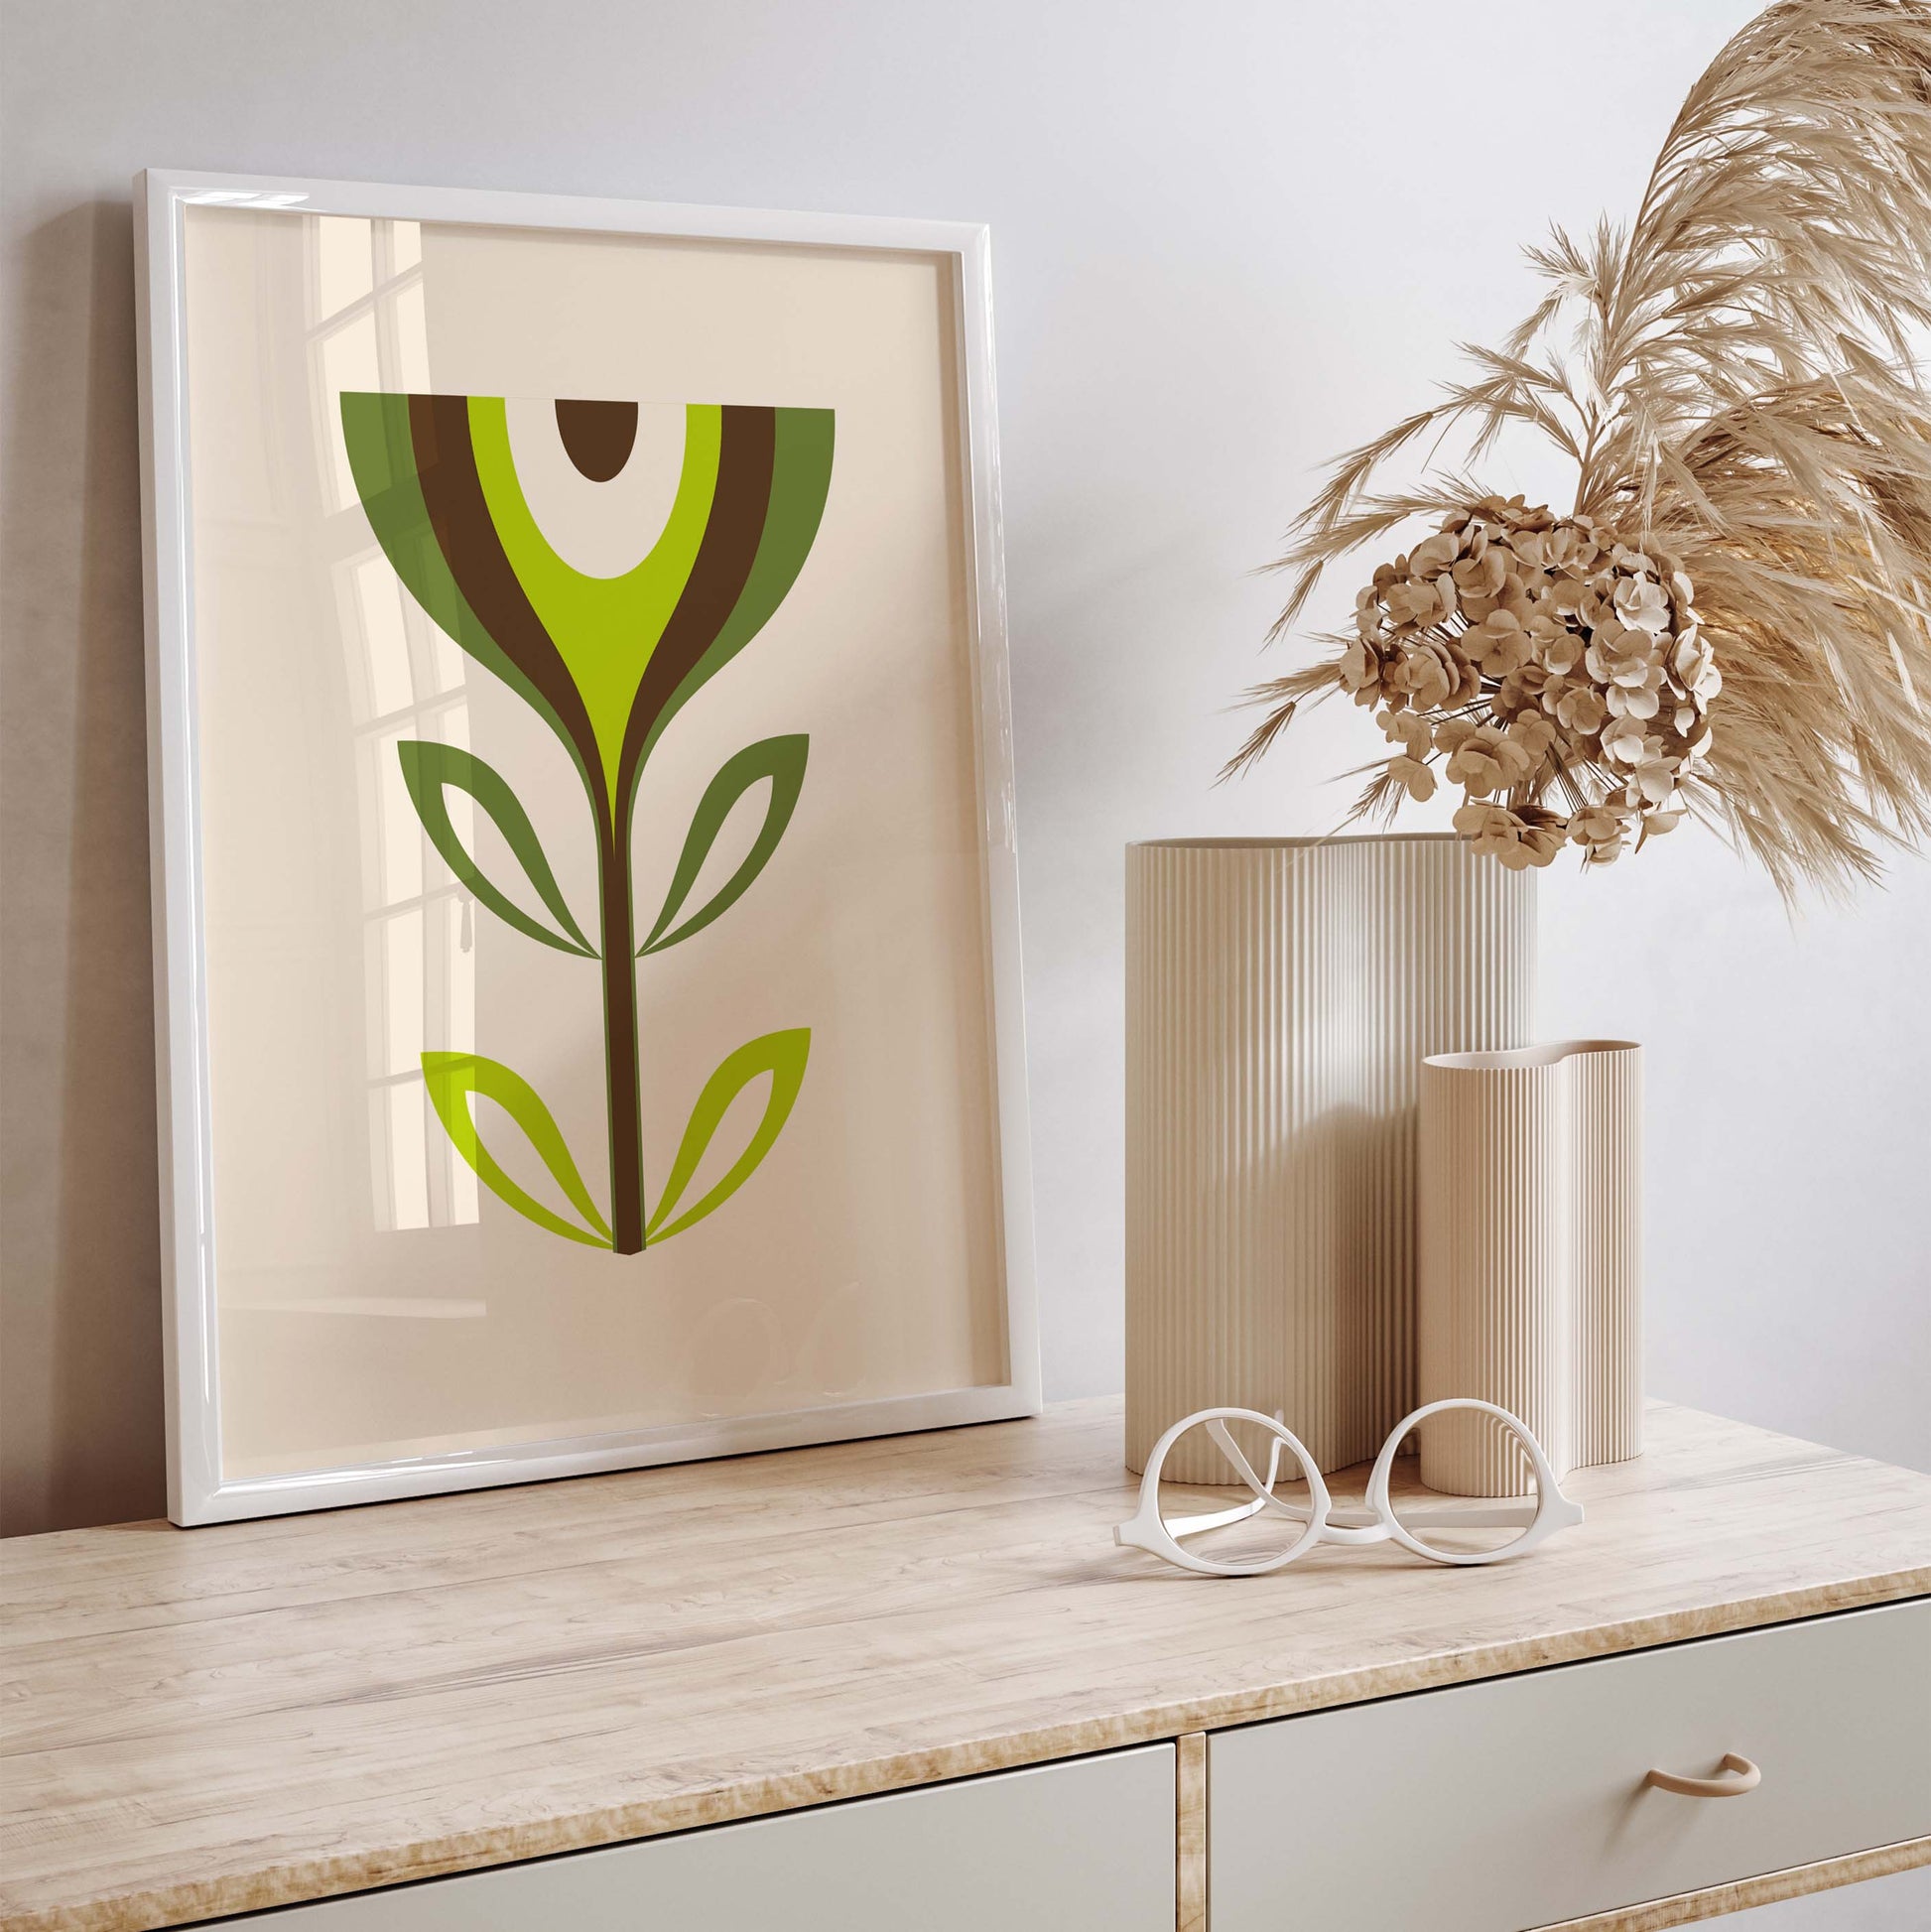 Flower print in a mid century modern style in green tones